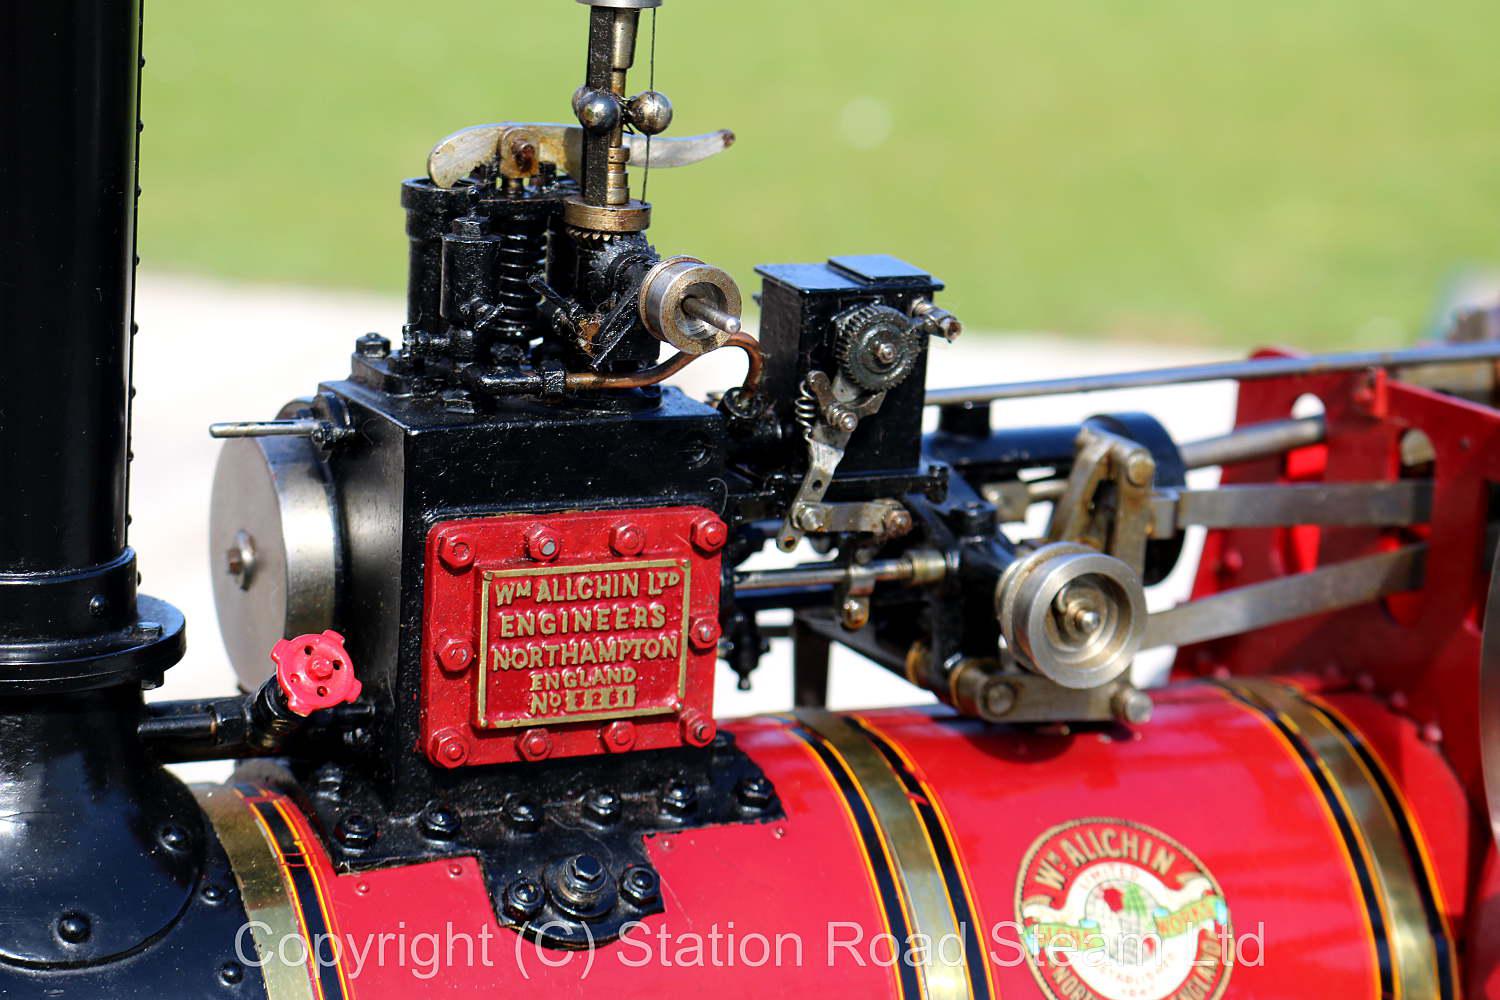 1 1/2 inch scale Allchin traction engine with glass case